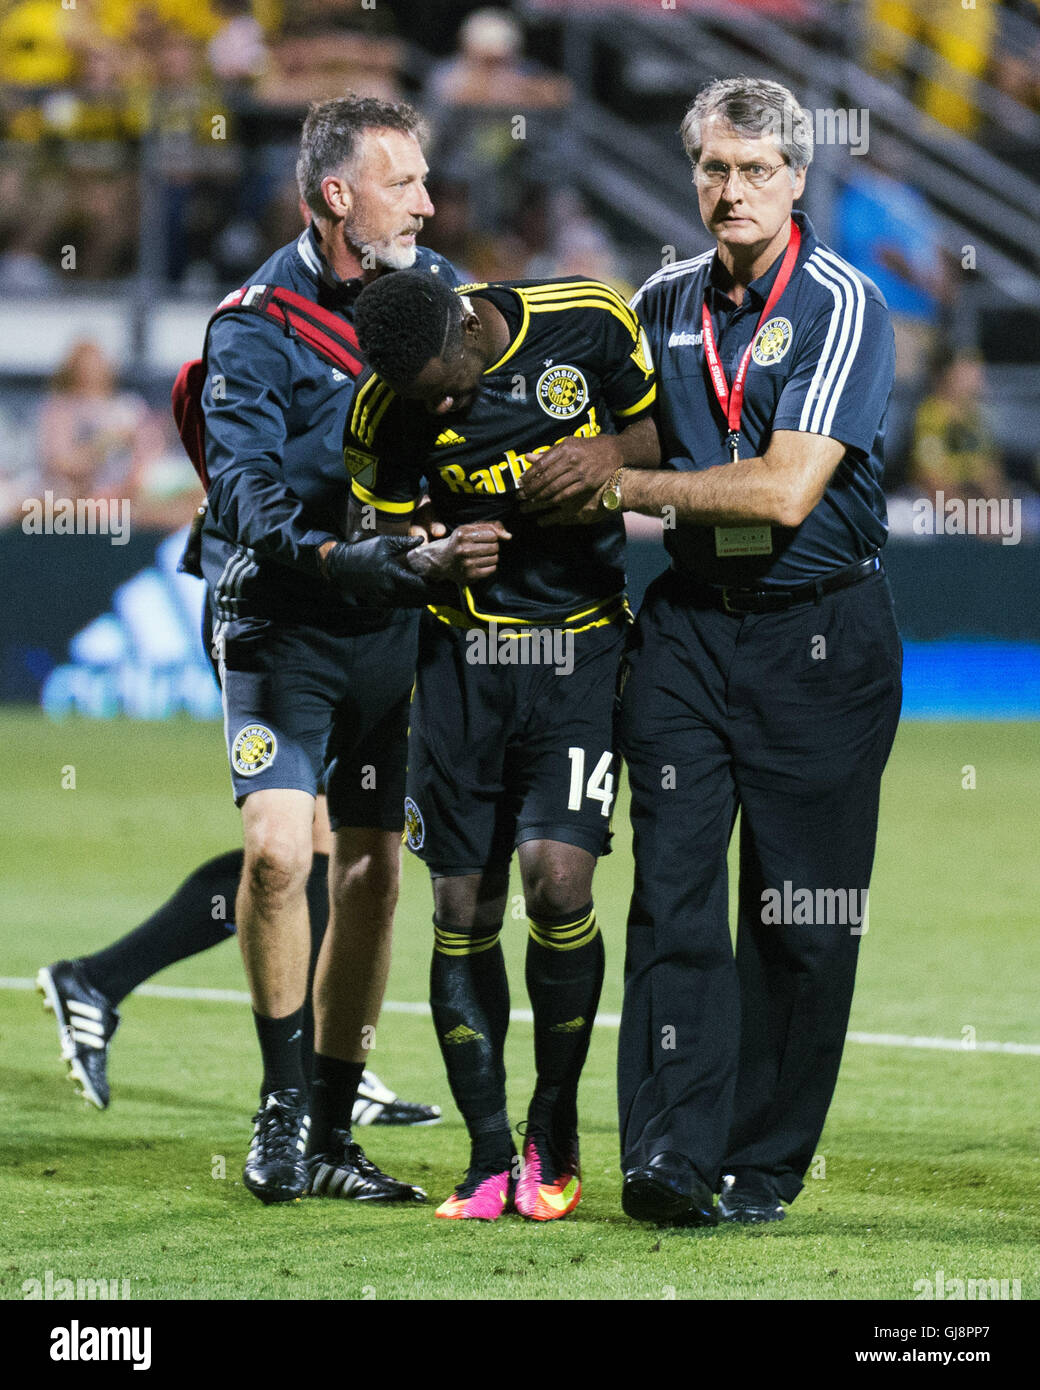 Columbus, U.S.A. 13th Aug, 2016. August 13, 2016: Columbus Crew SC defender Waylon Francis (14) is helped off the pitch after suffering a shoulder injury in the second half against New York FC. Columbus, OH, USA. (Brent Clark/Alamy Live News) Stock Photo